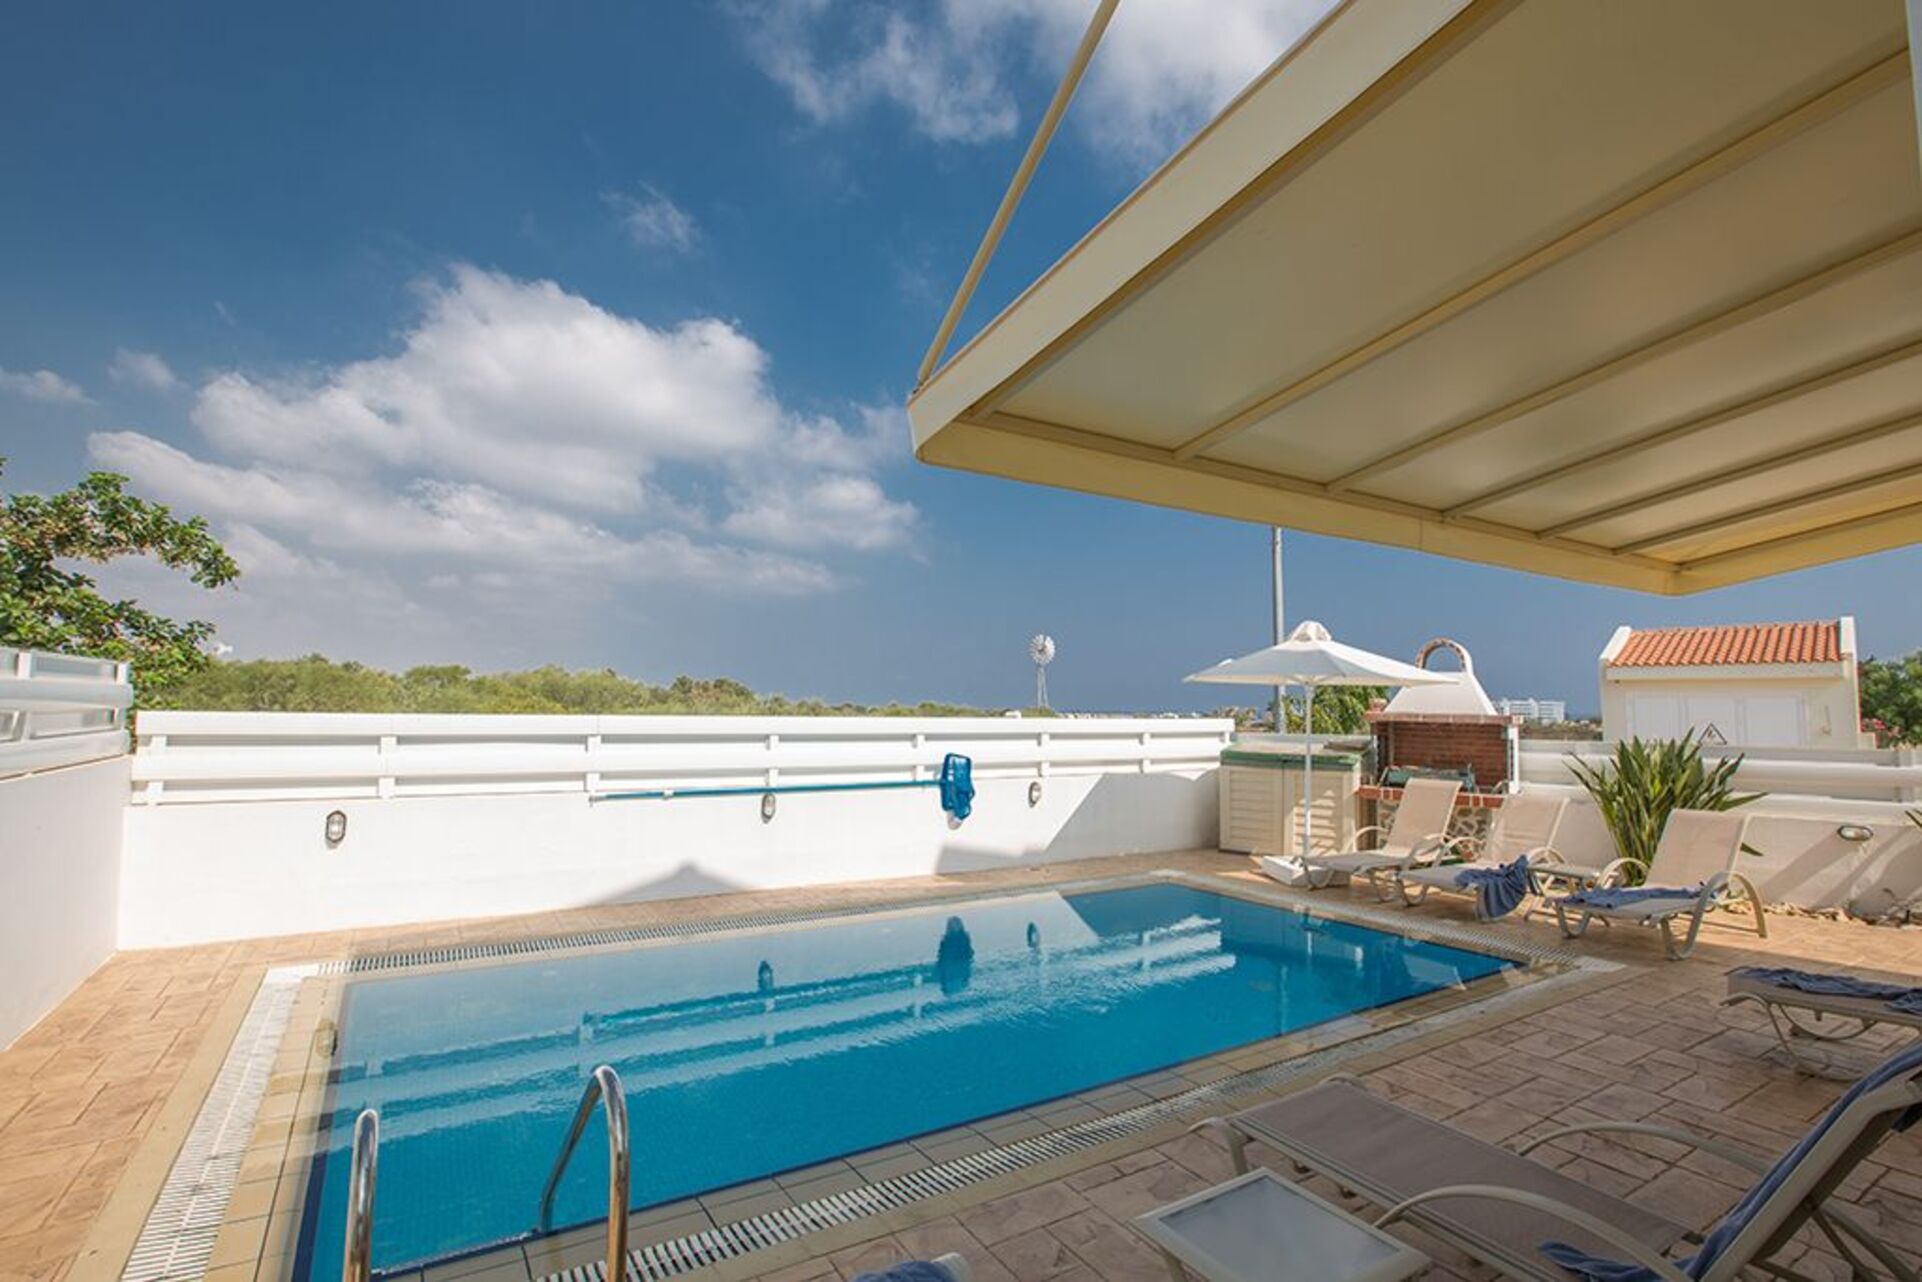 Property Image 2 - Rent Your Dream Protaras Holiday Villa and Look Forward to Relaxing Beside Your Private Pool, Paralimni Vi